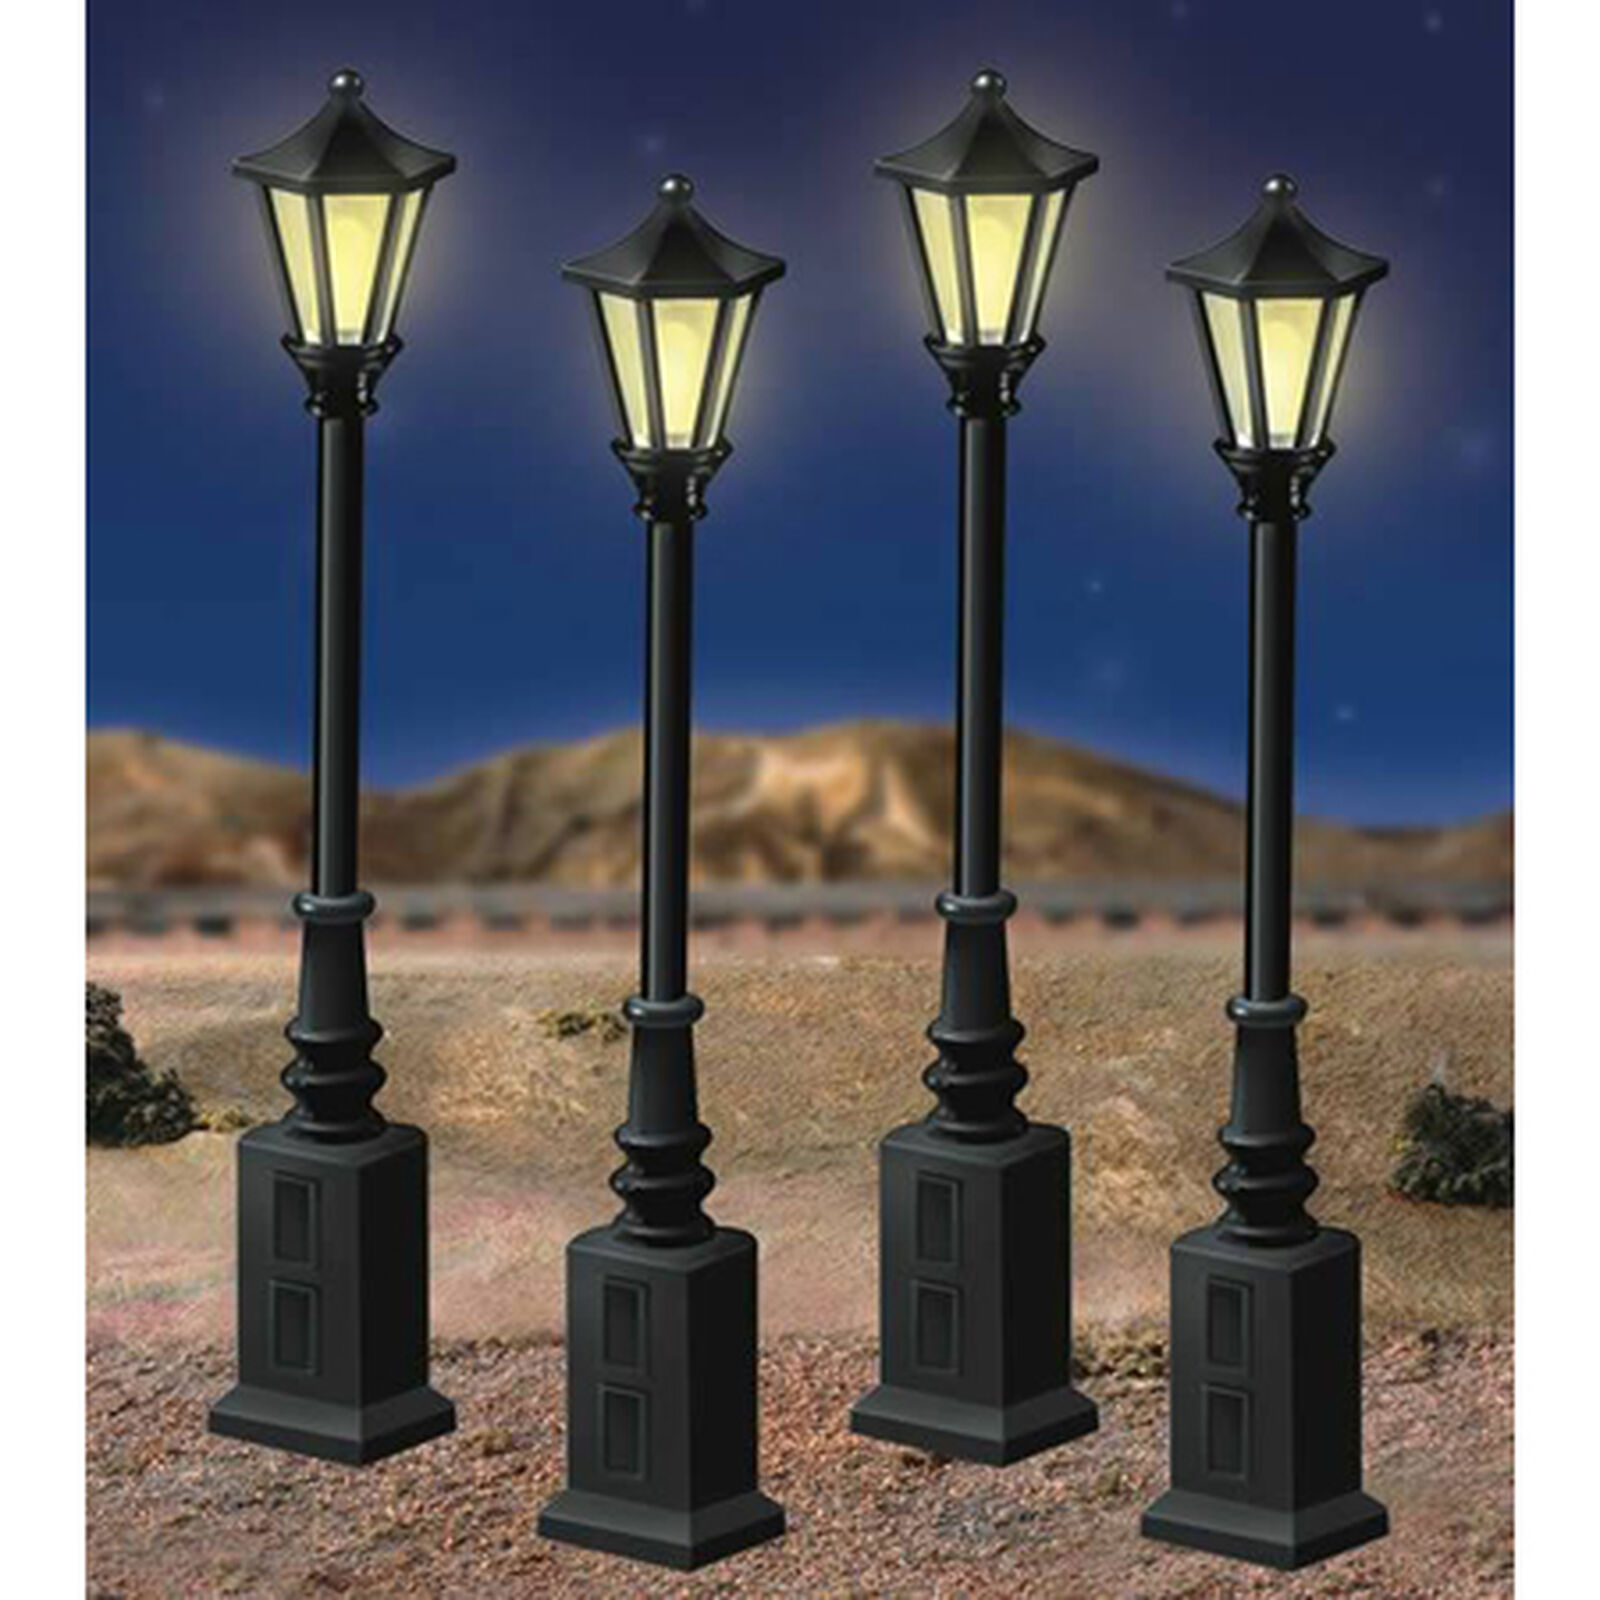 O Lionelville Street Lamps